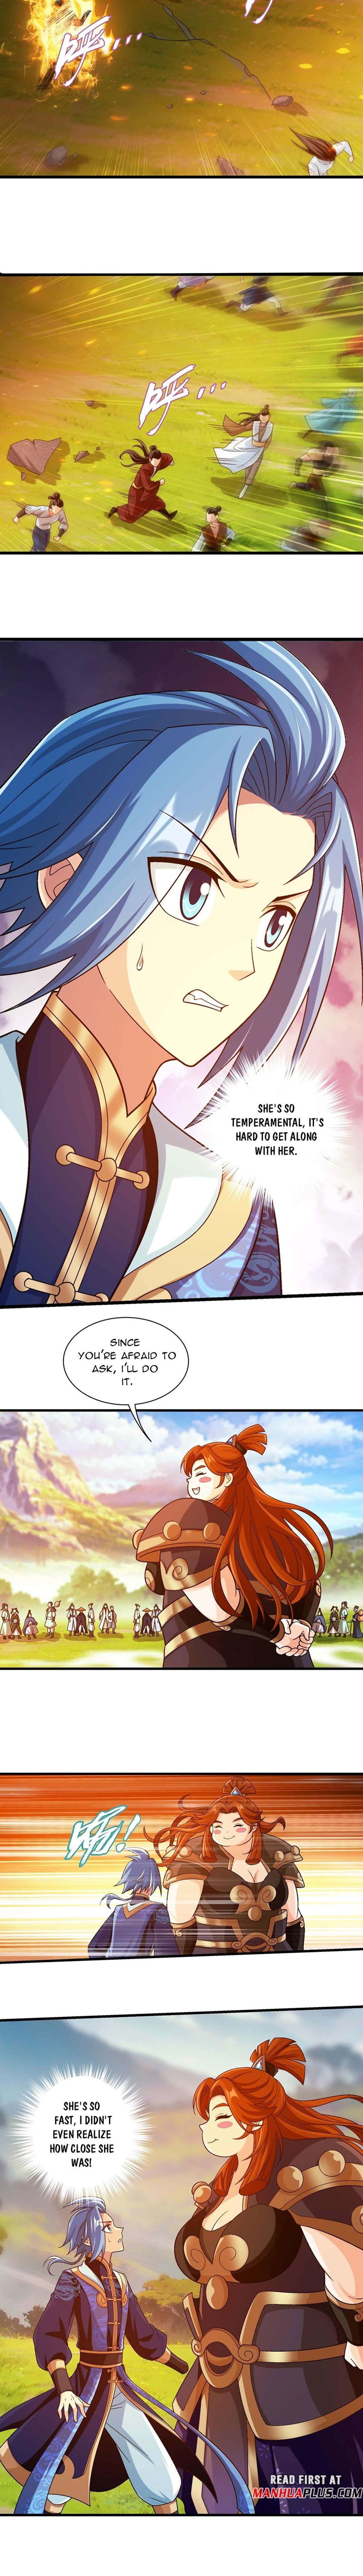 The Great Ruler Chapter 444 page 10